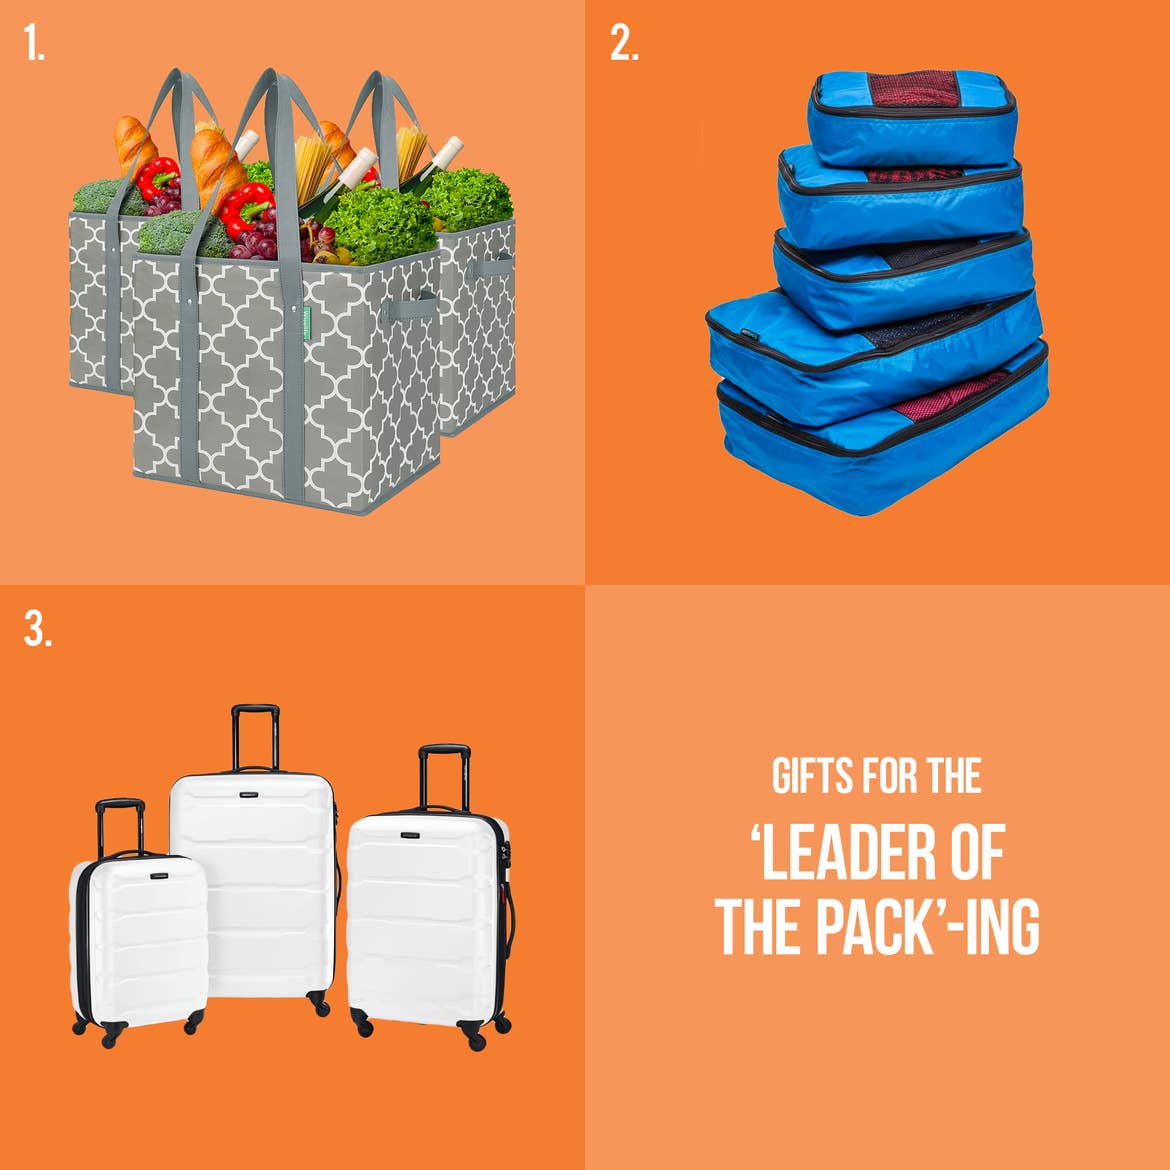 Reusable grocery bags, blue packing cubes, and a set of white luggage image are placed on top of an orange graphic that reads, 'Gifts for the "Leader-Of-the-Pack"-ing.'